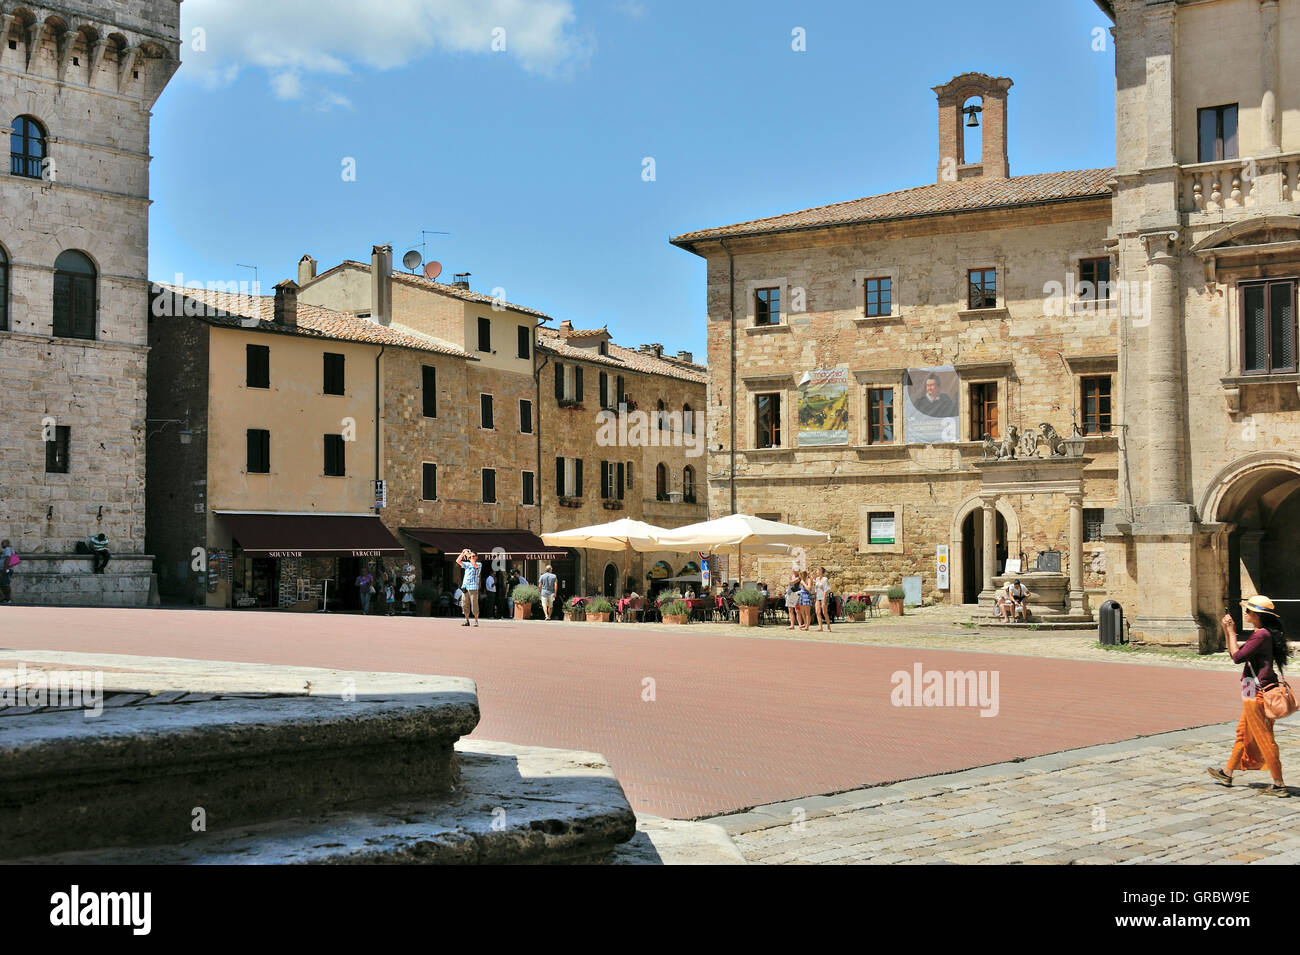 Main Place Piazza Grande In The Town Montepulciano With Buildings Of ...